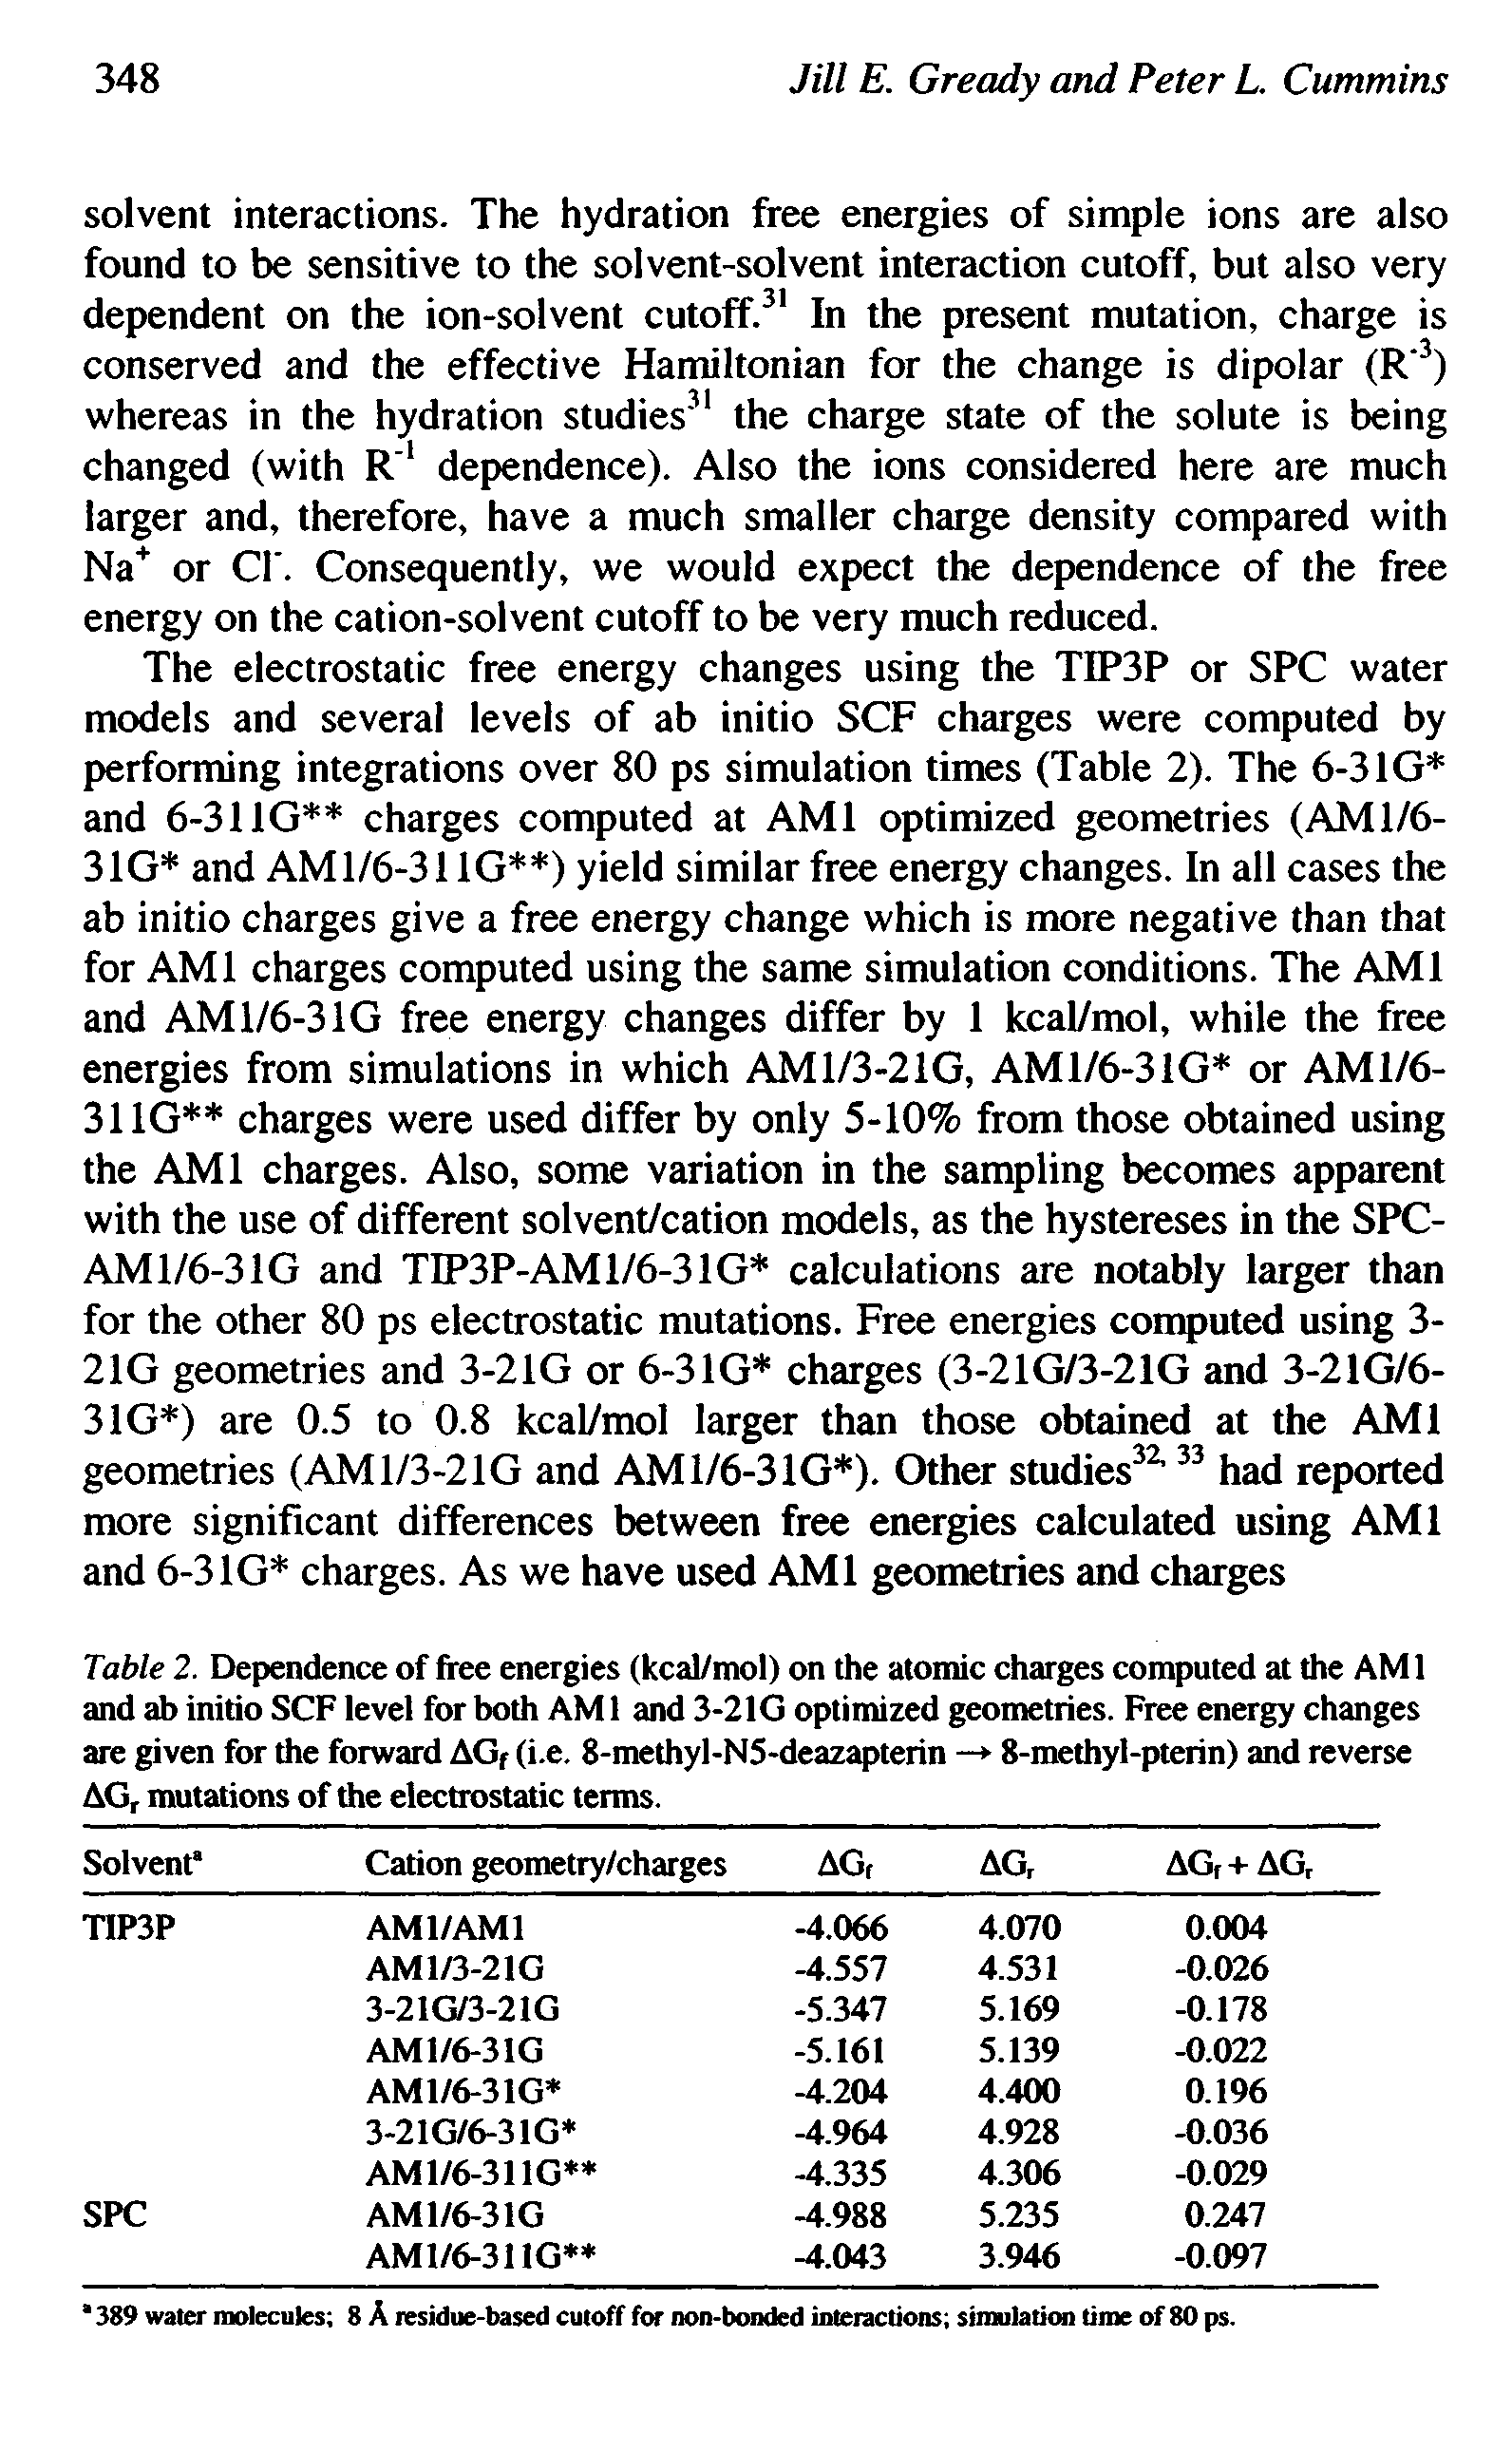 Table 2. Dependence of free energies (kcal/mol) on the atomic charges computed at the AMI and ab initio SCF level for both AM 1 and 3-21G optimized geometries. Free energy changes are given for the forward AGf (i.e. 8-methyl-N5-deazapterin - 8-methyl-pterin) and reverse AGr mutations of the electrostatic terms.